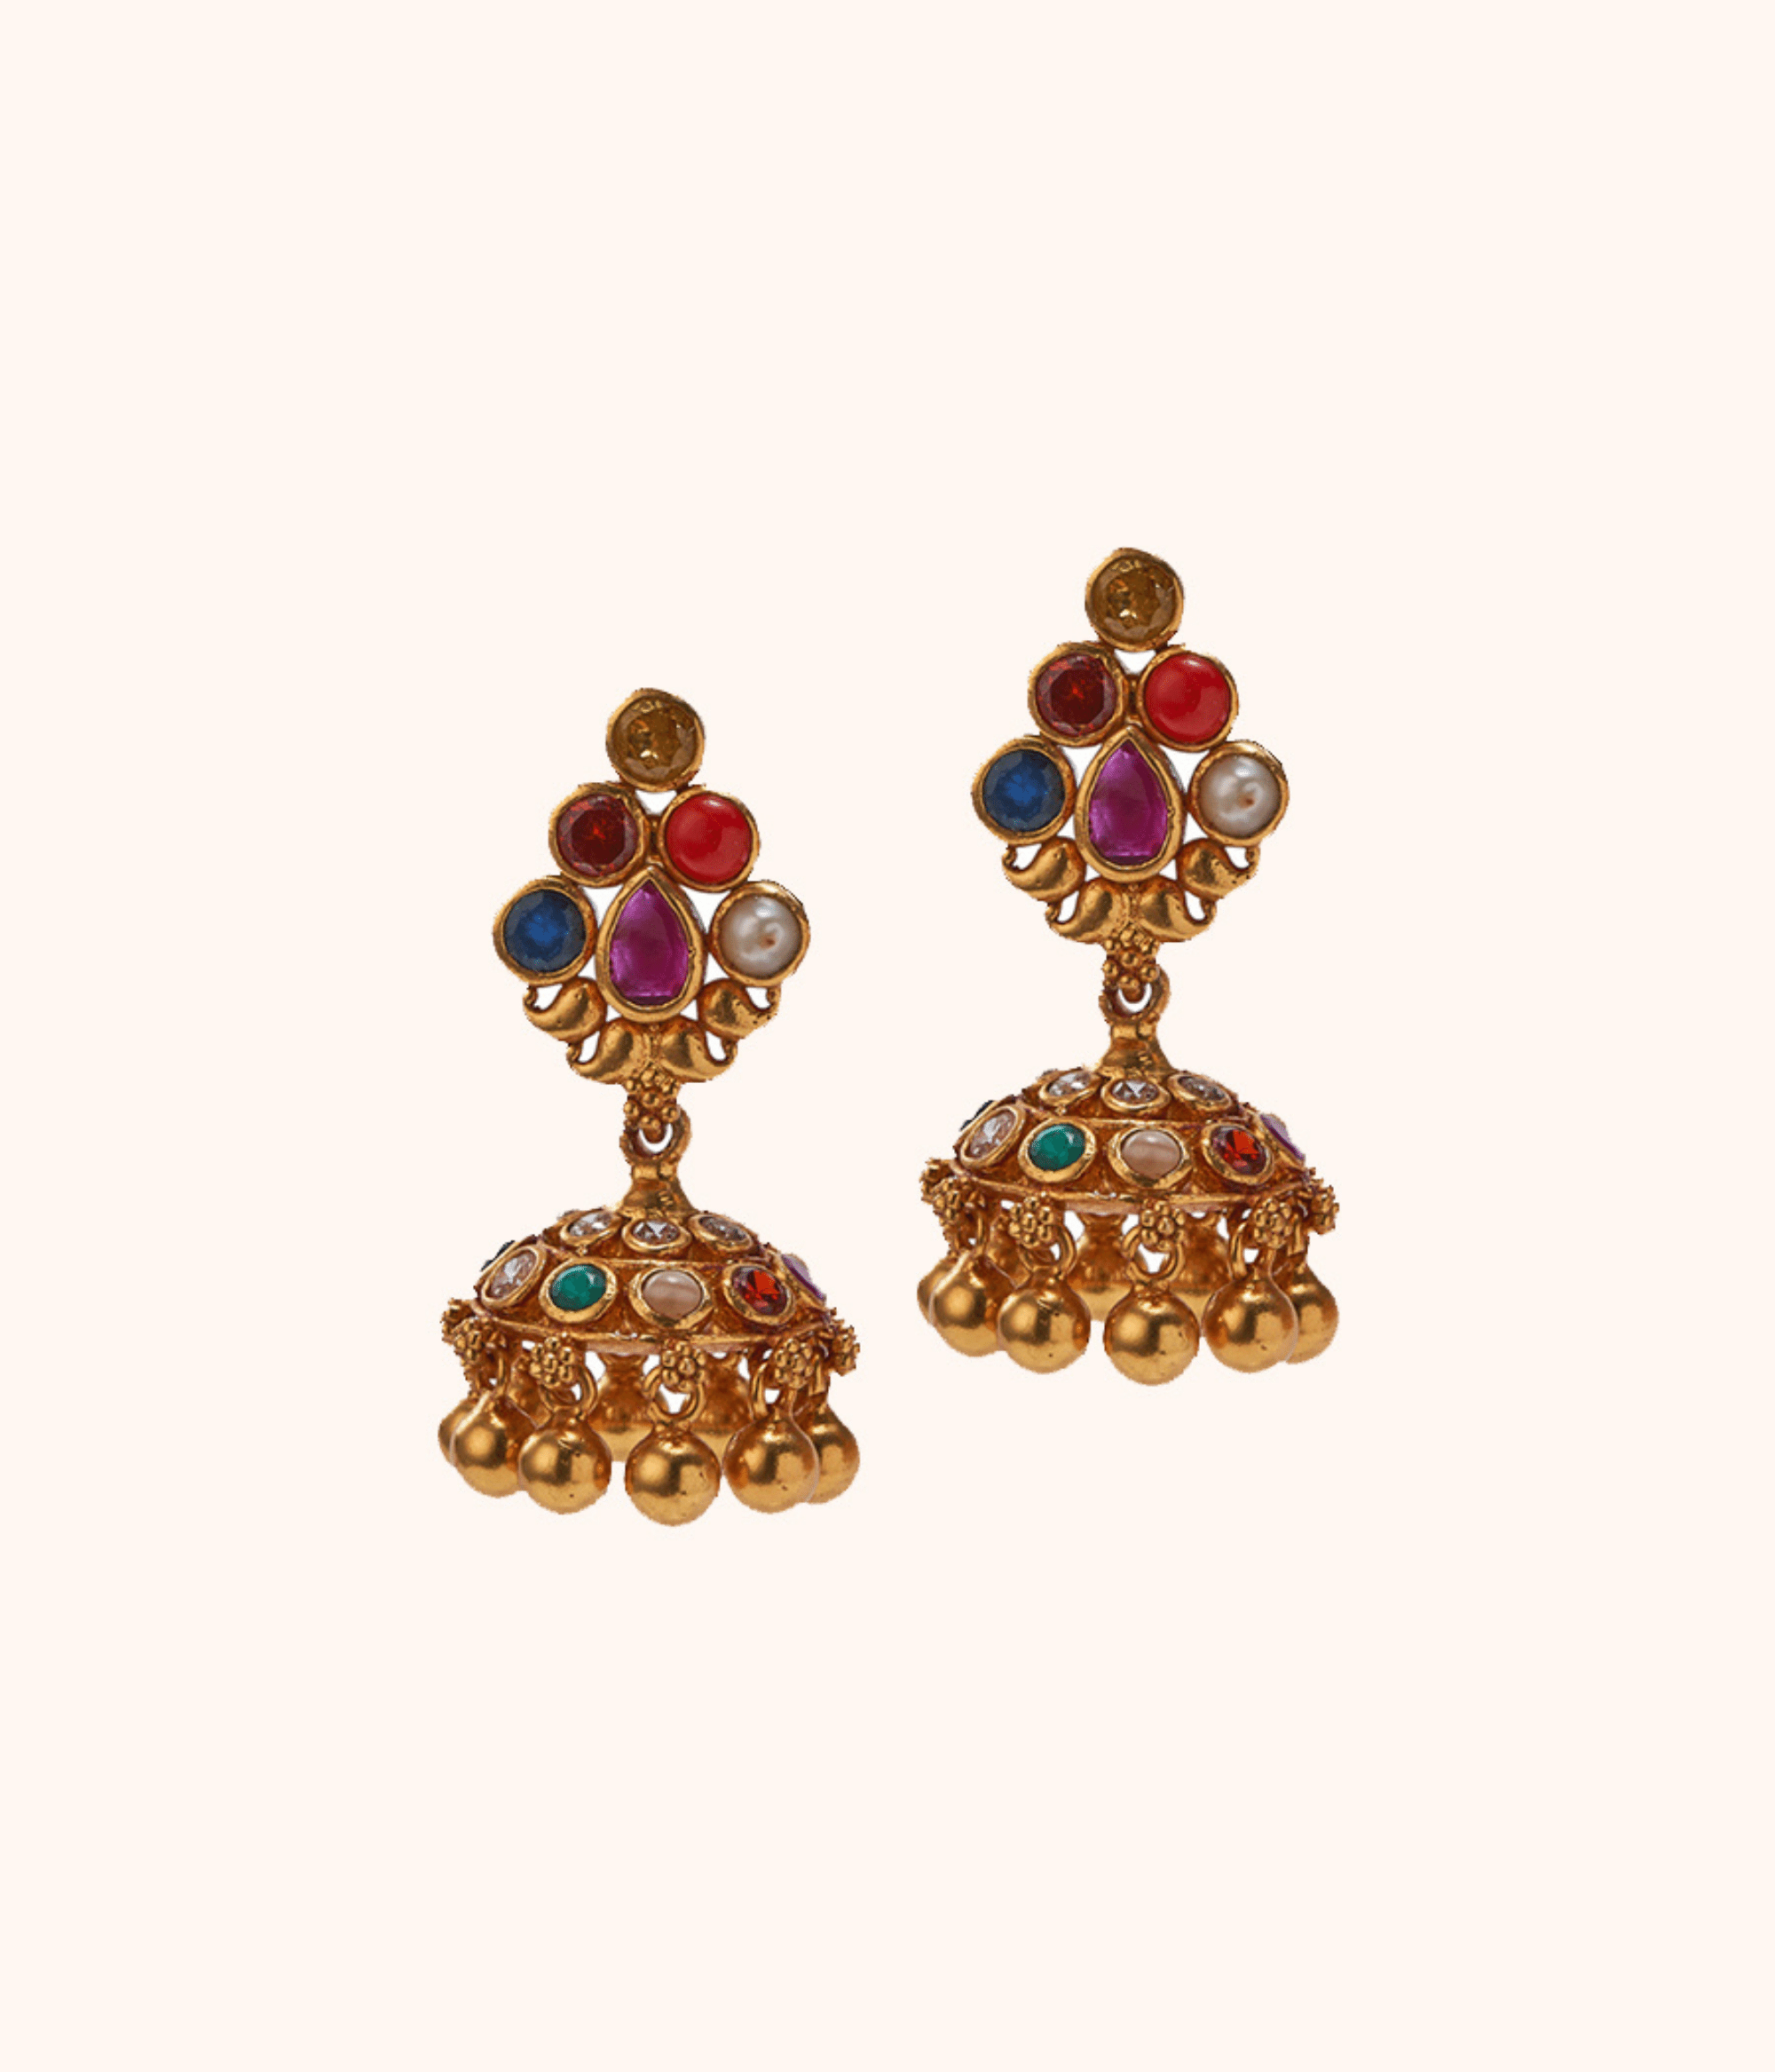 The Palmy Ratna Earring